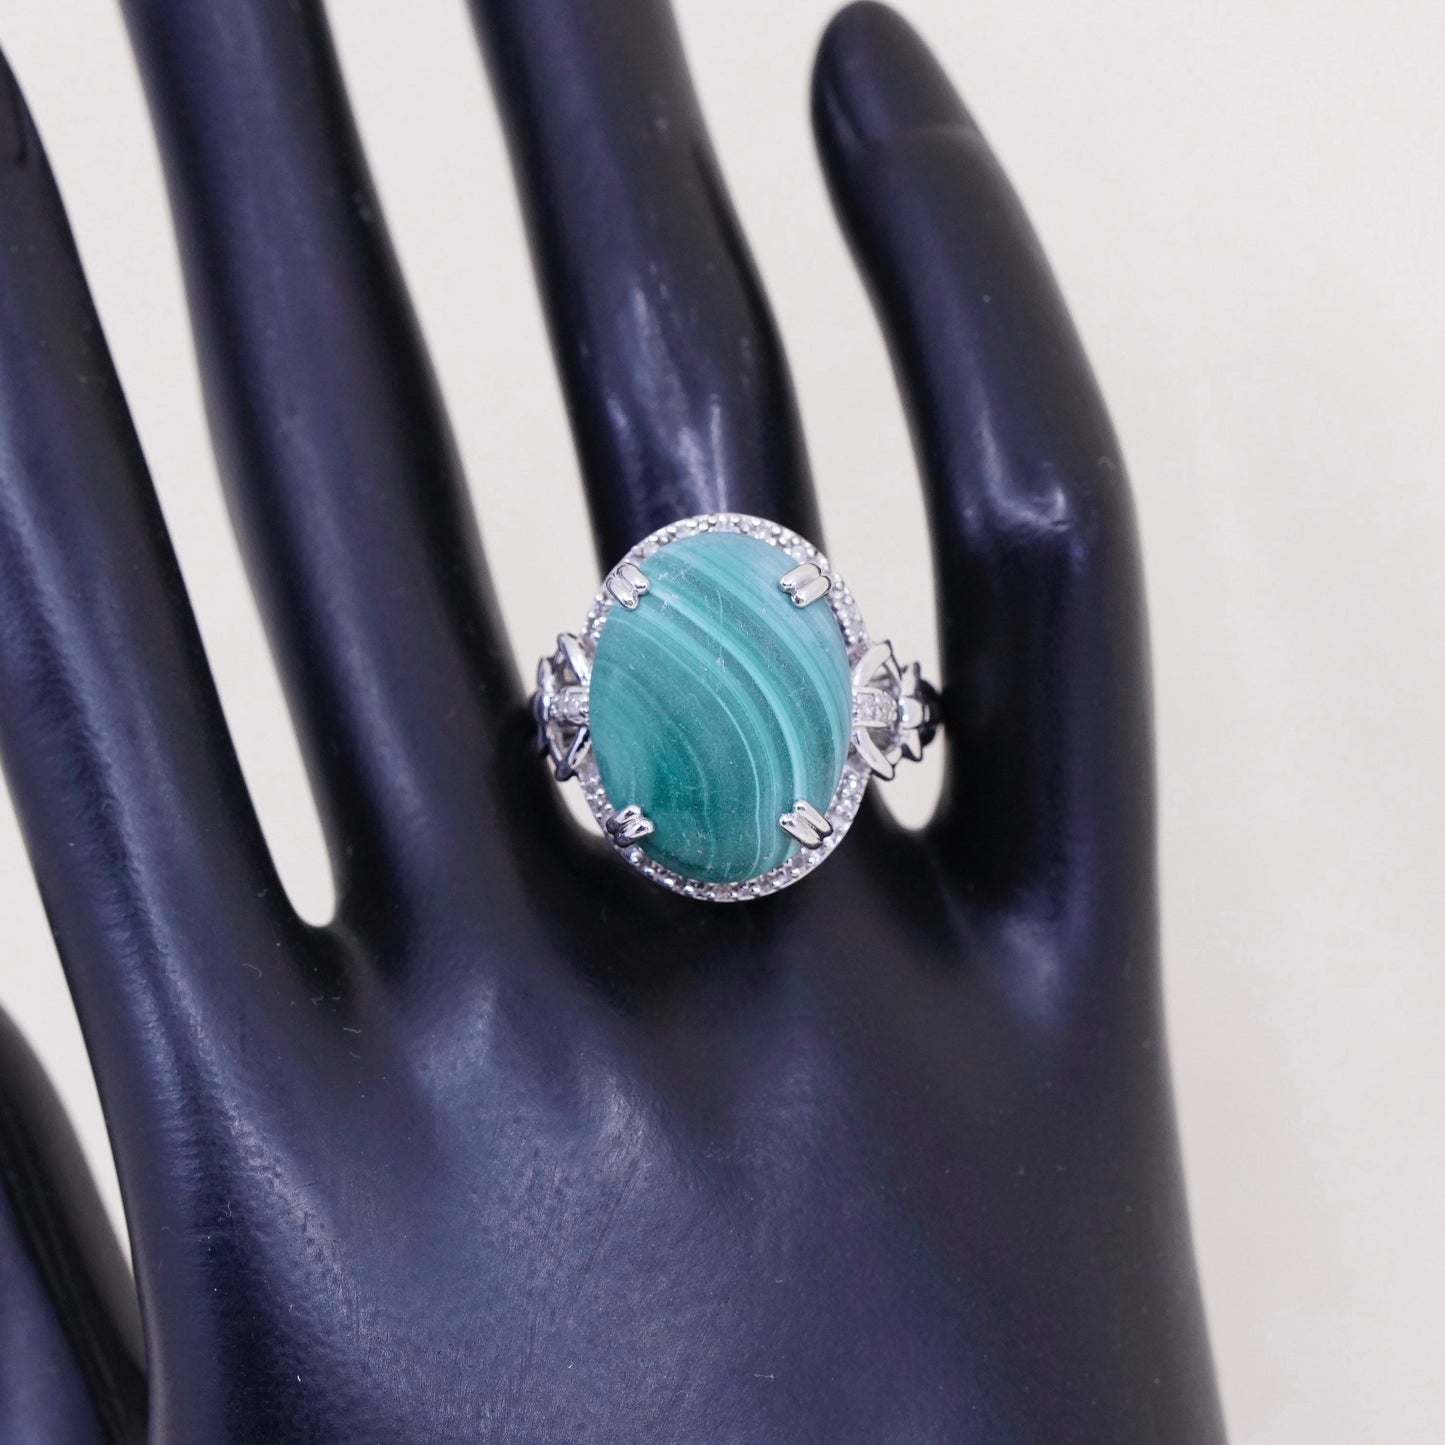 Size 9.25, sterling 925 silver handmade ring with malachite and cluster diamond